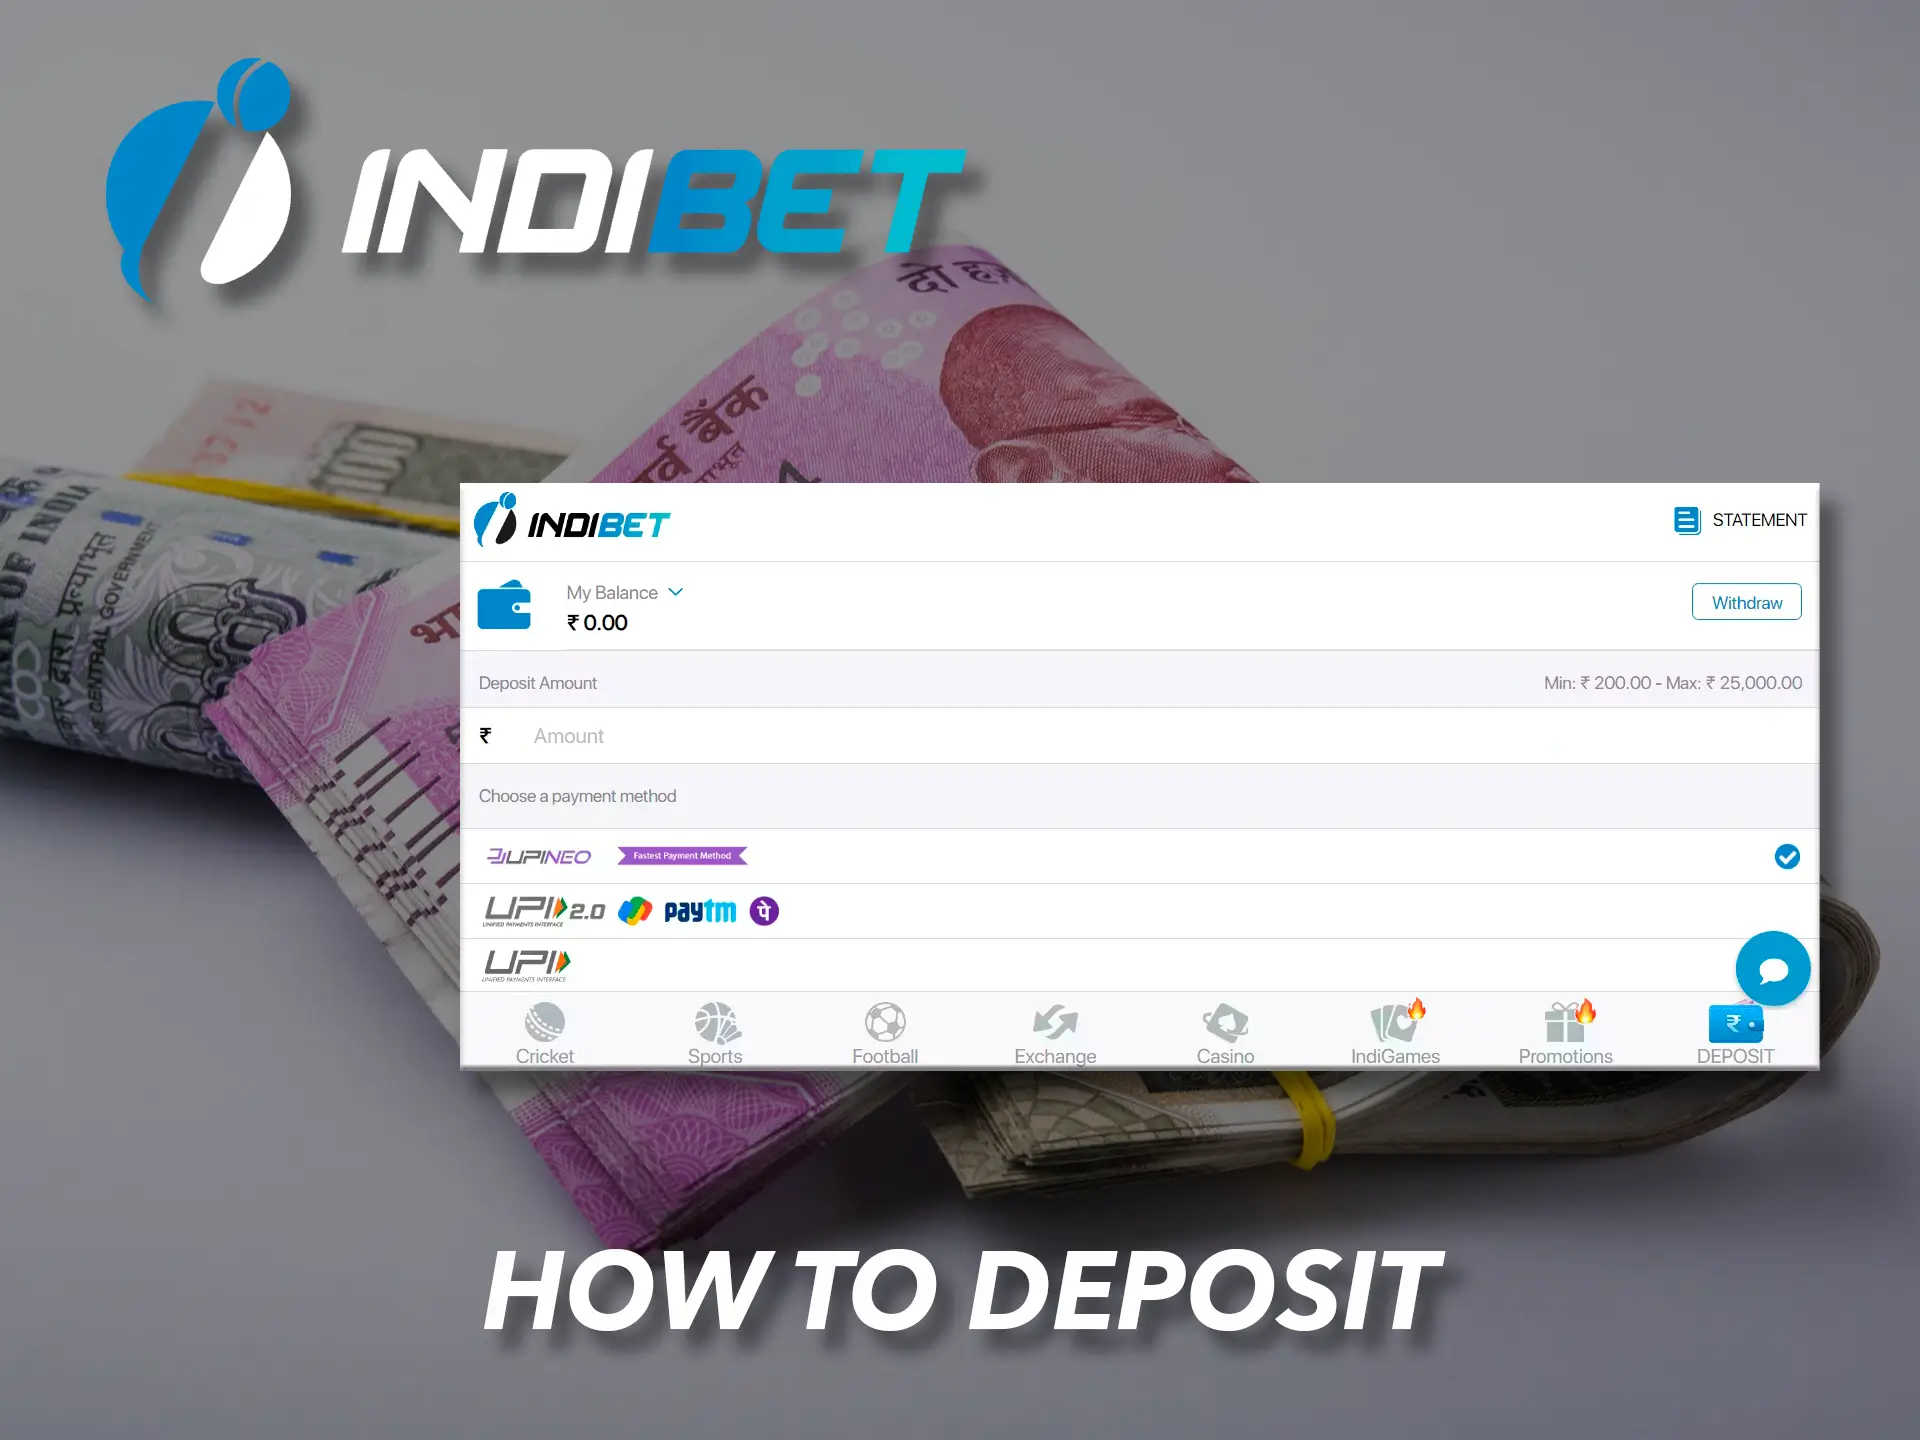 Make your first deposit with Indibet in your desired currency.